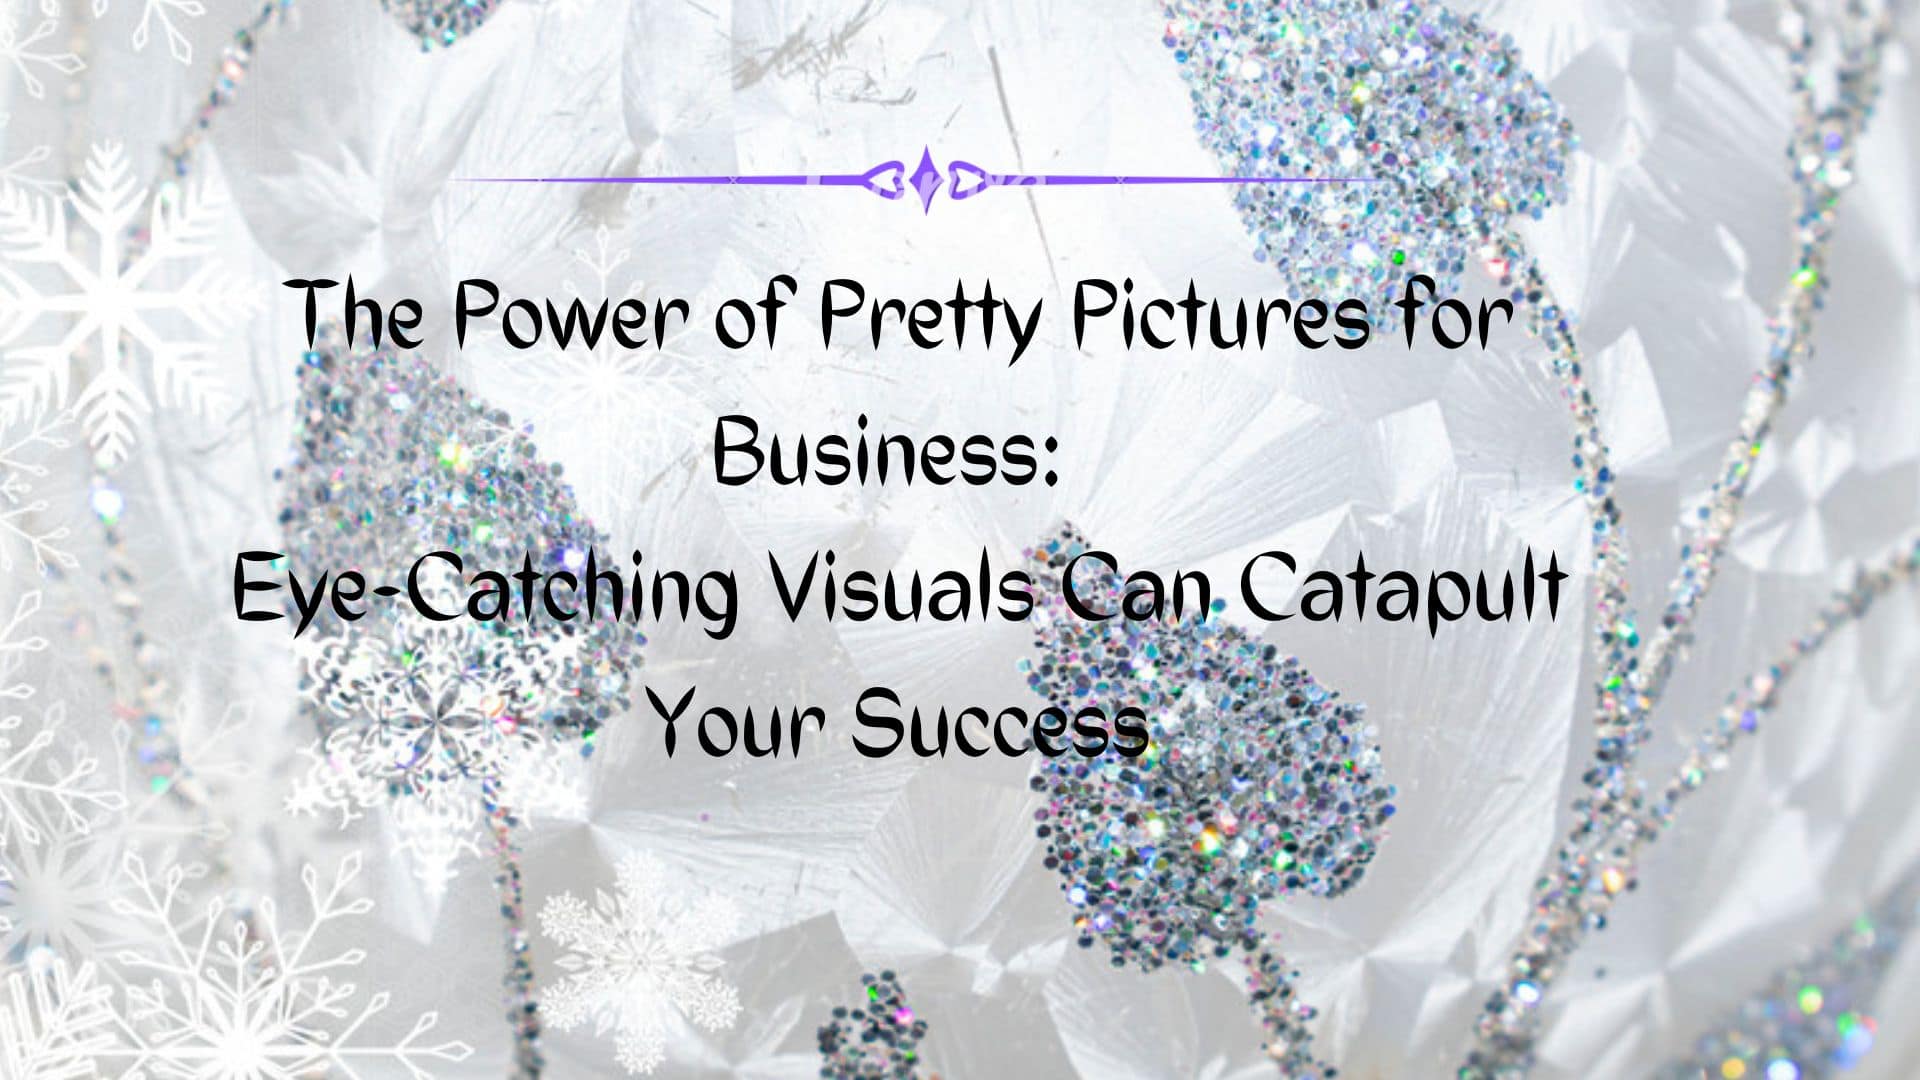 The Power of Pretty Pictures for Business: How Eye-Catching Visuals Can Catapult Your Brand’s Success